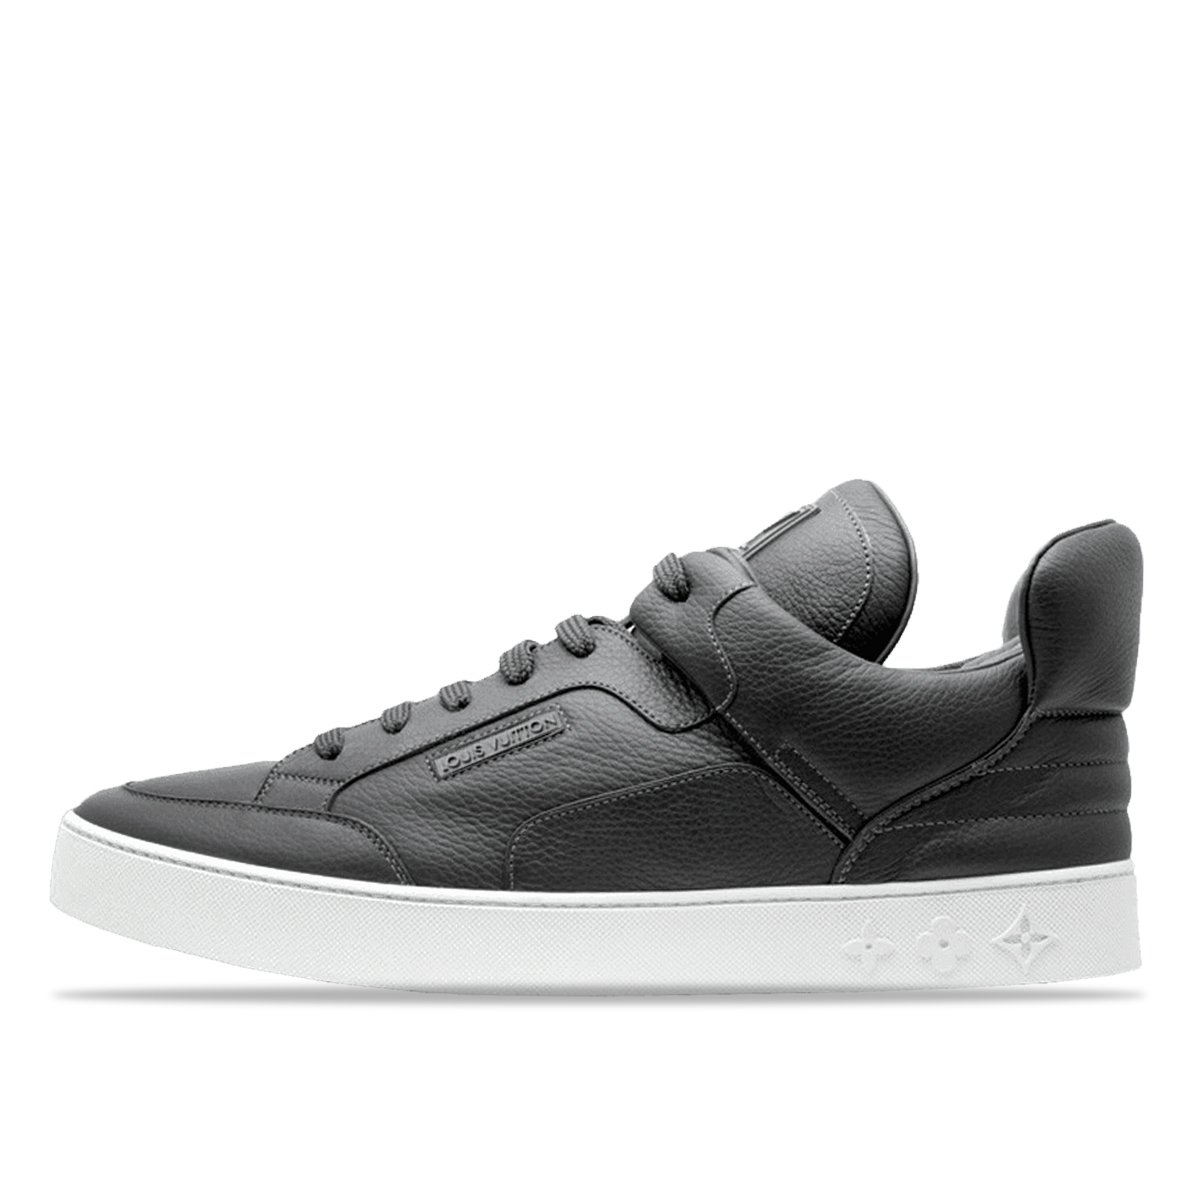 Buy Kanye West x Louis Vuitton Don 'Anthracite' - YP6U3PPC